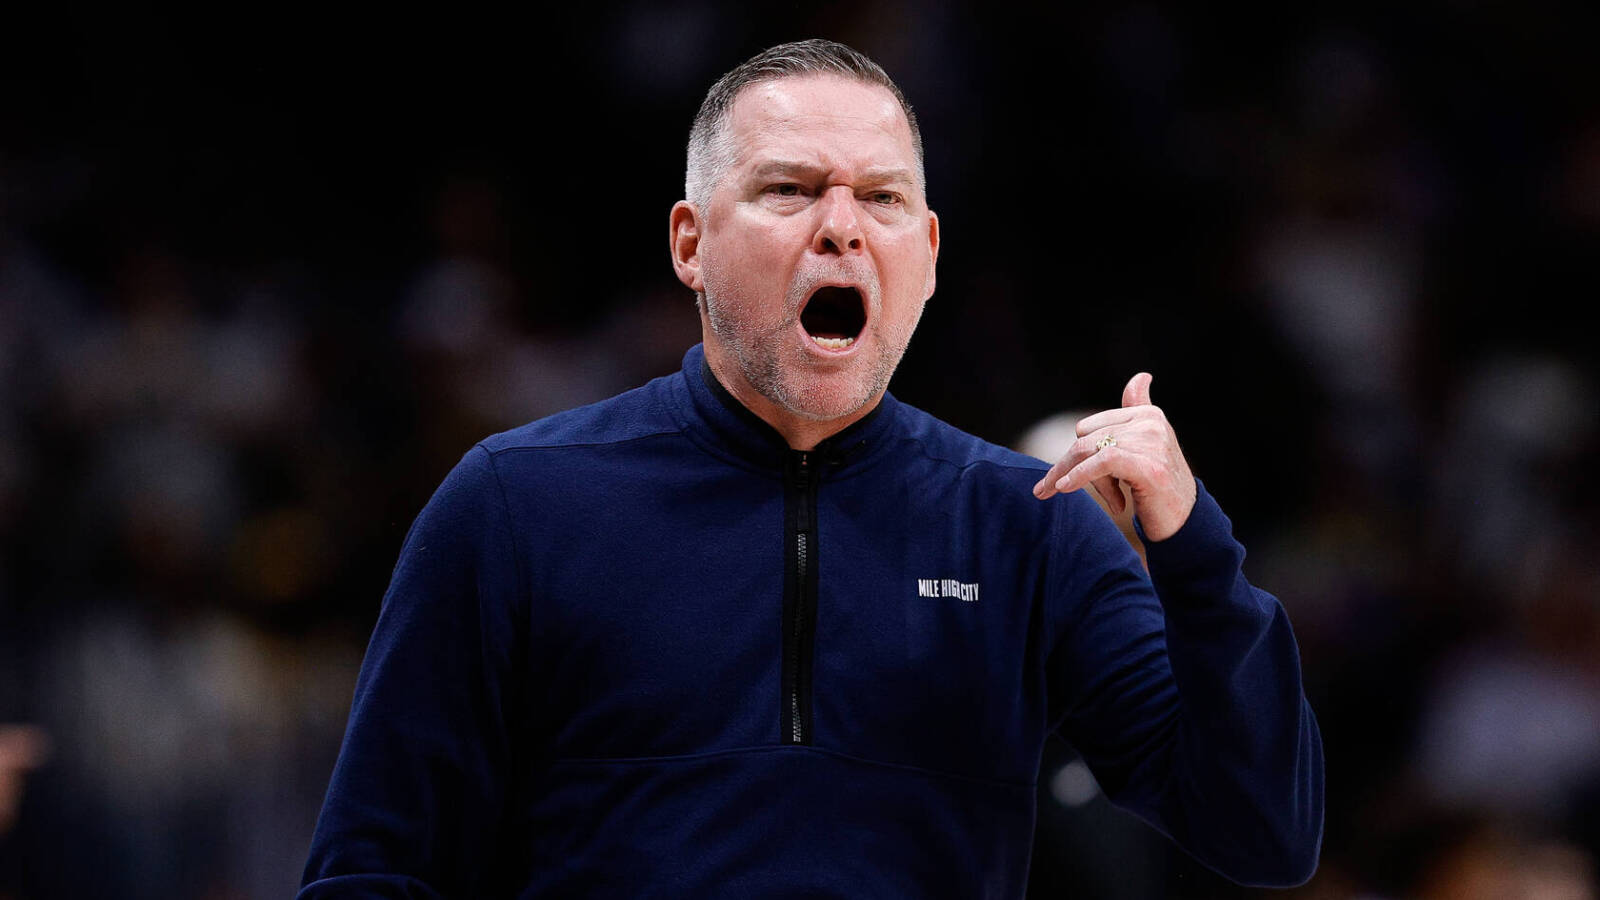 Watch: Nuggets HC Michael Malone gets into it with the referees